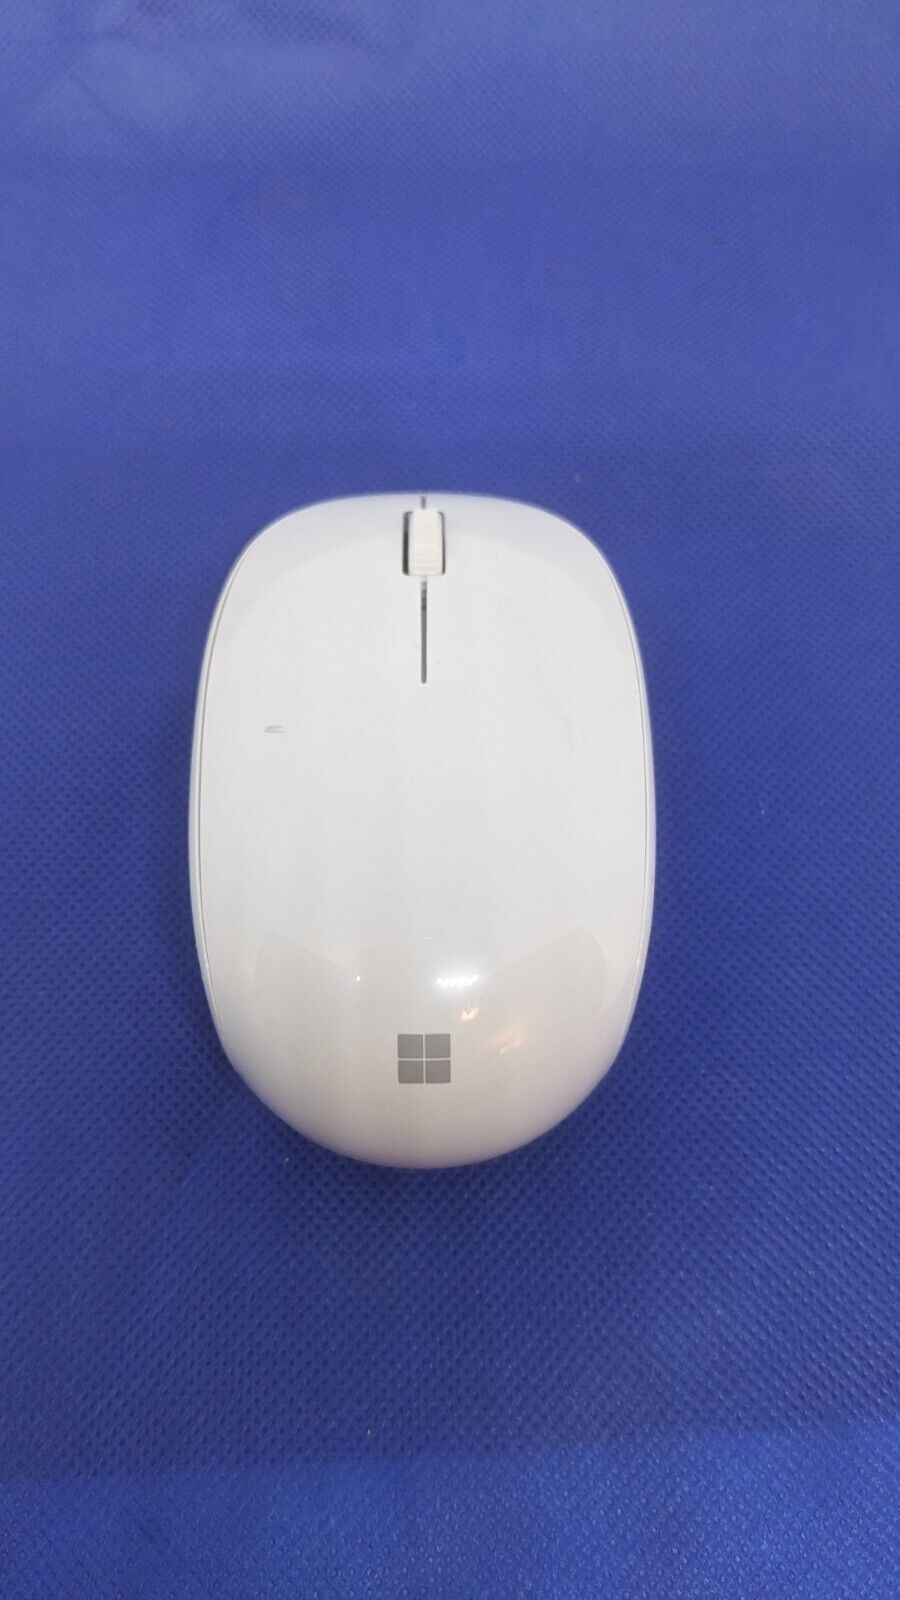 Genuine Microsoft Bluetooth Wireless Mouse RJN-00061 Ice Glacier Tested Working